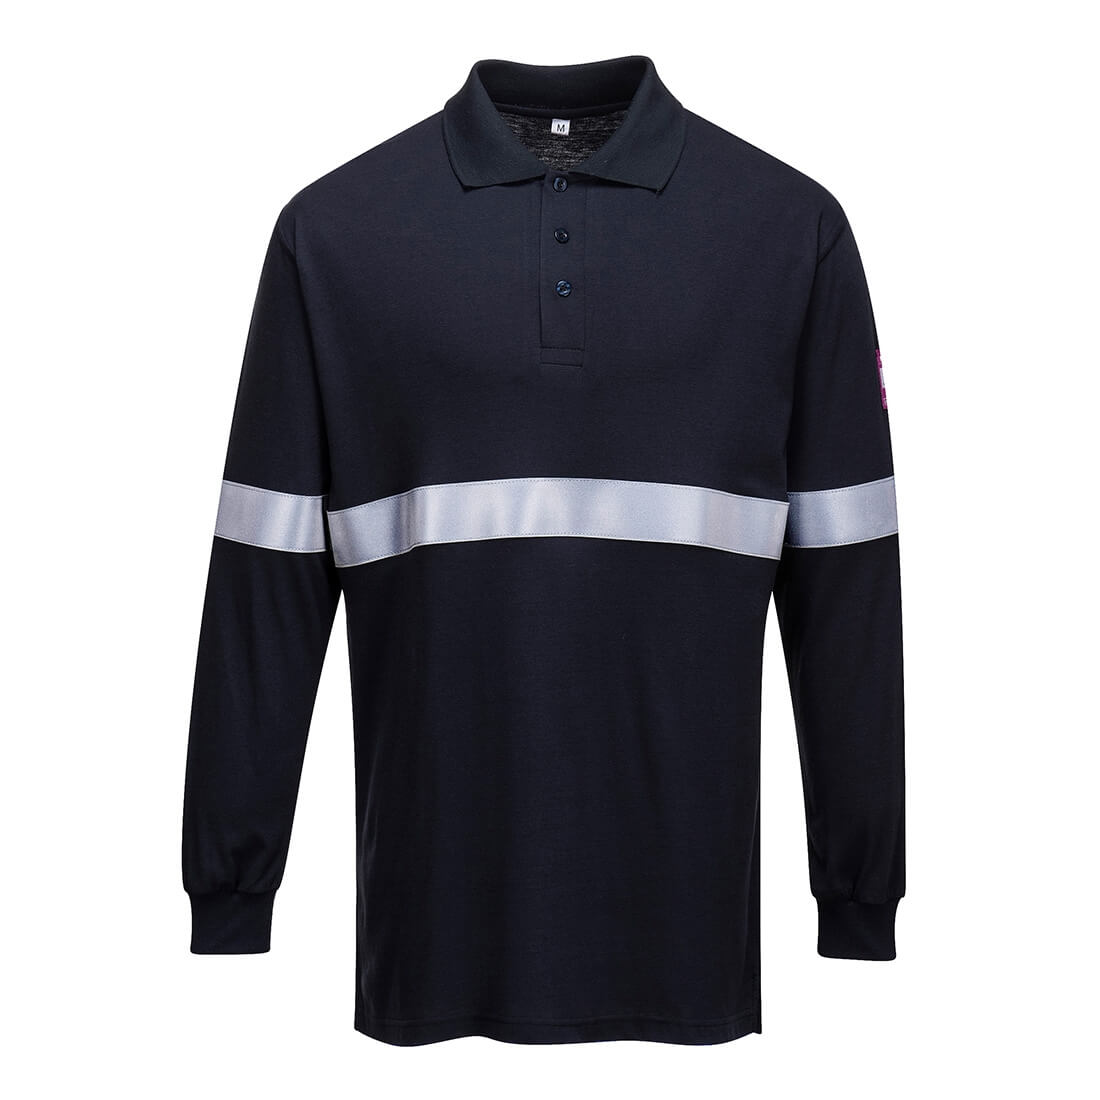 Flame Resistant Anti-Static Long Sleeve Polo Shirt with Reflective Tape - Safetywear